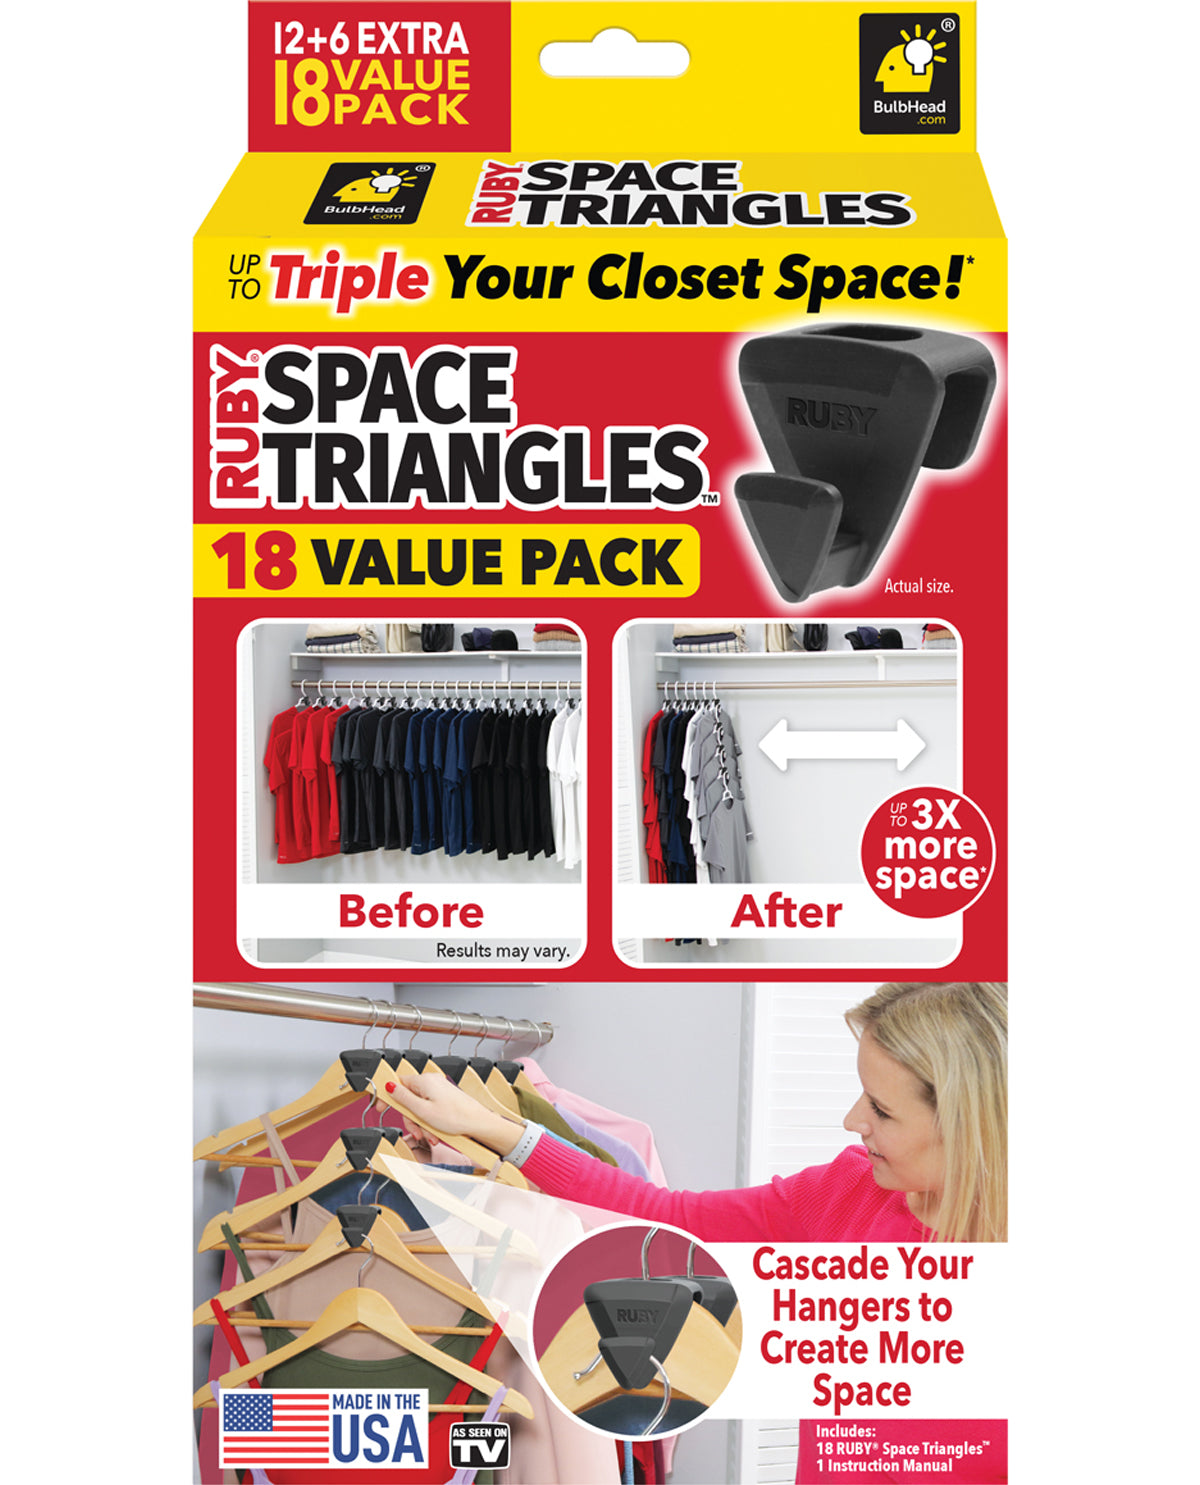 Create More Closet Space with Ruby Space Triangles 